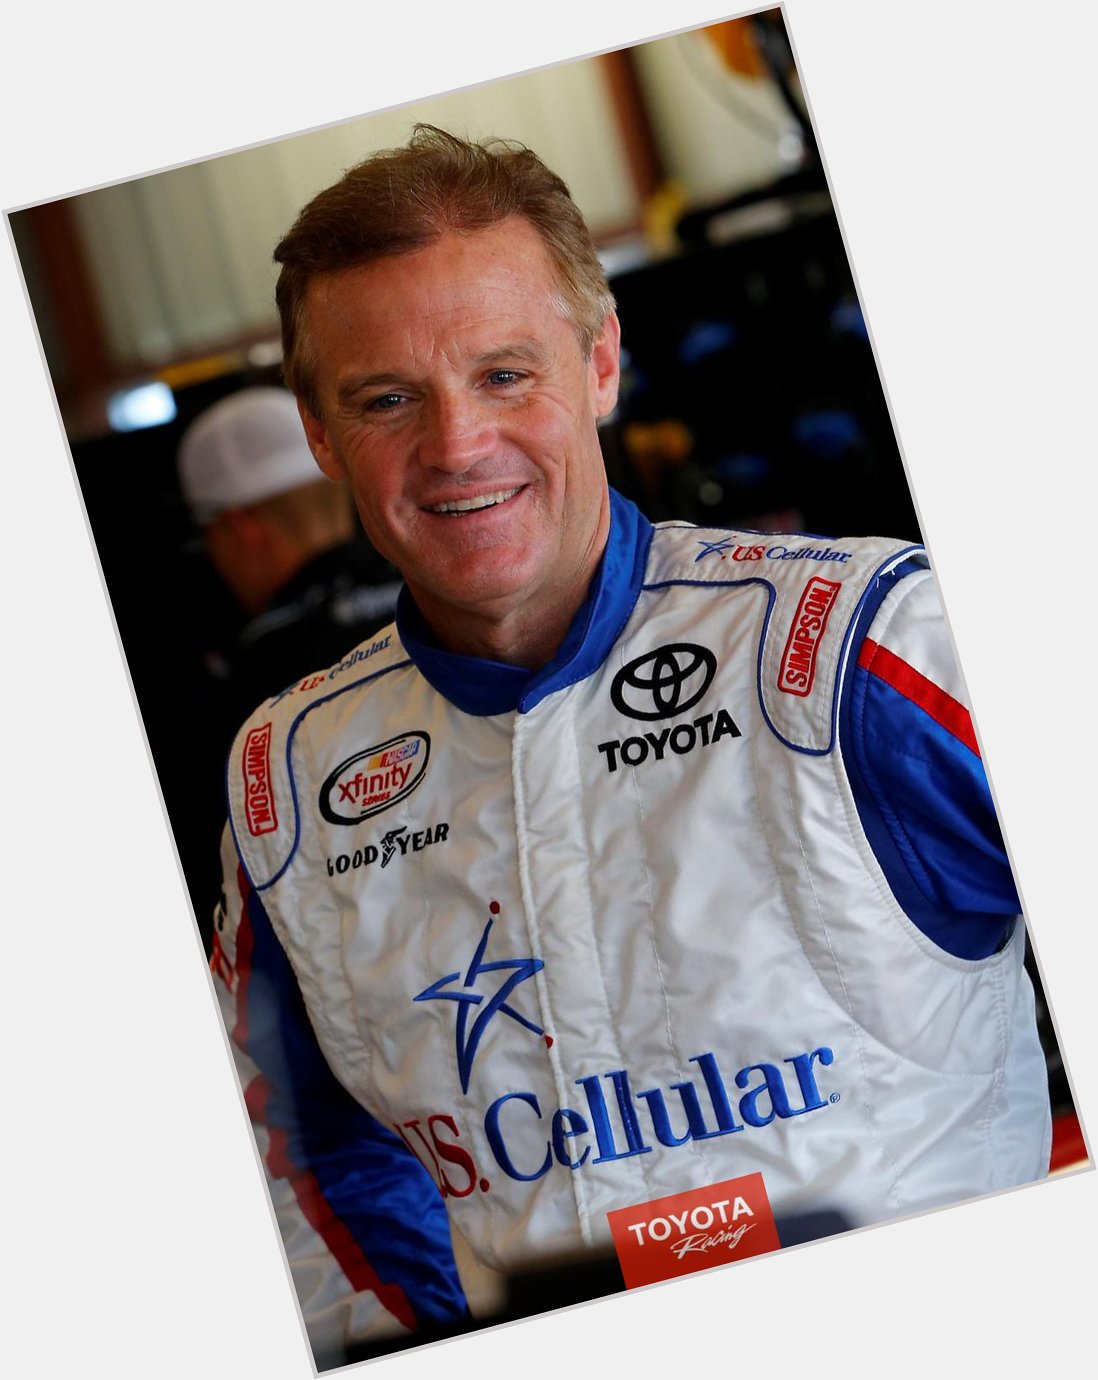   ToyotaRacing: REmessage to help us wish HAPPY BIRTHDAY to Kenny_Wallace! 